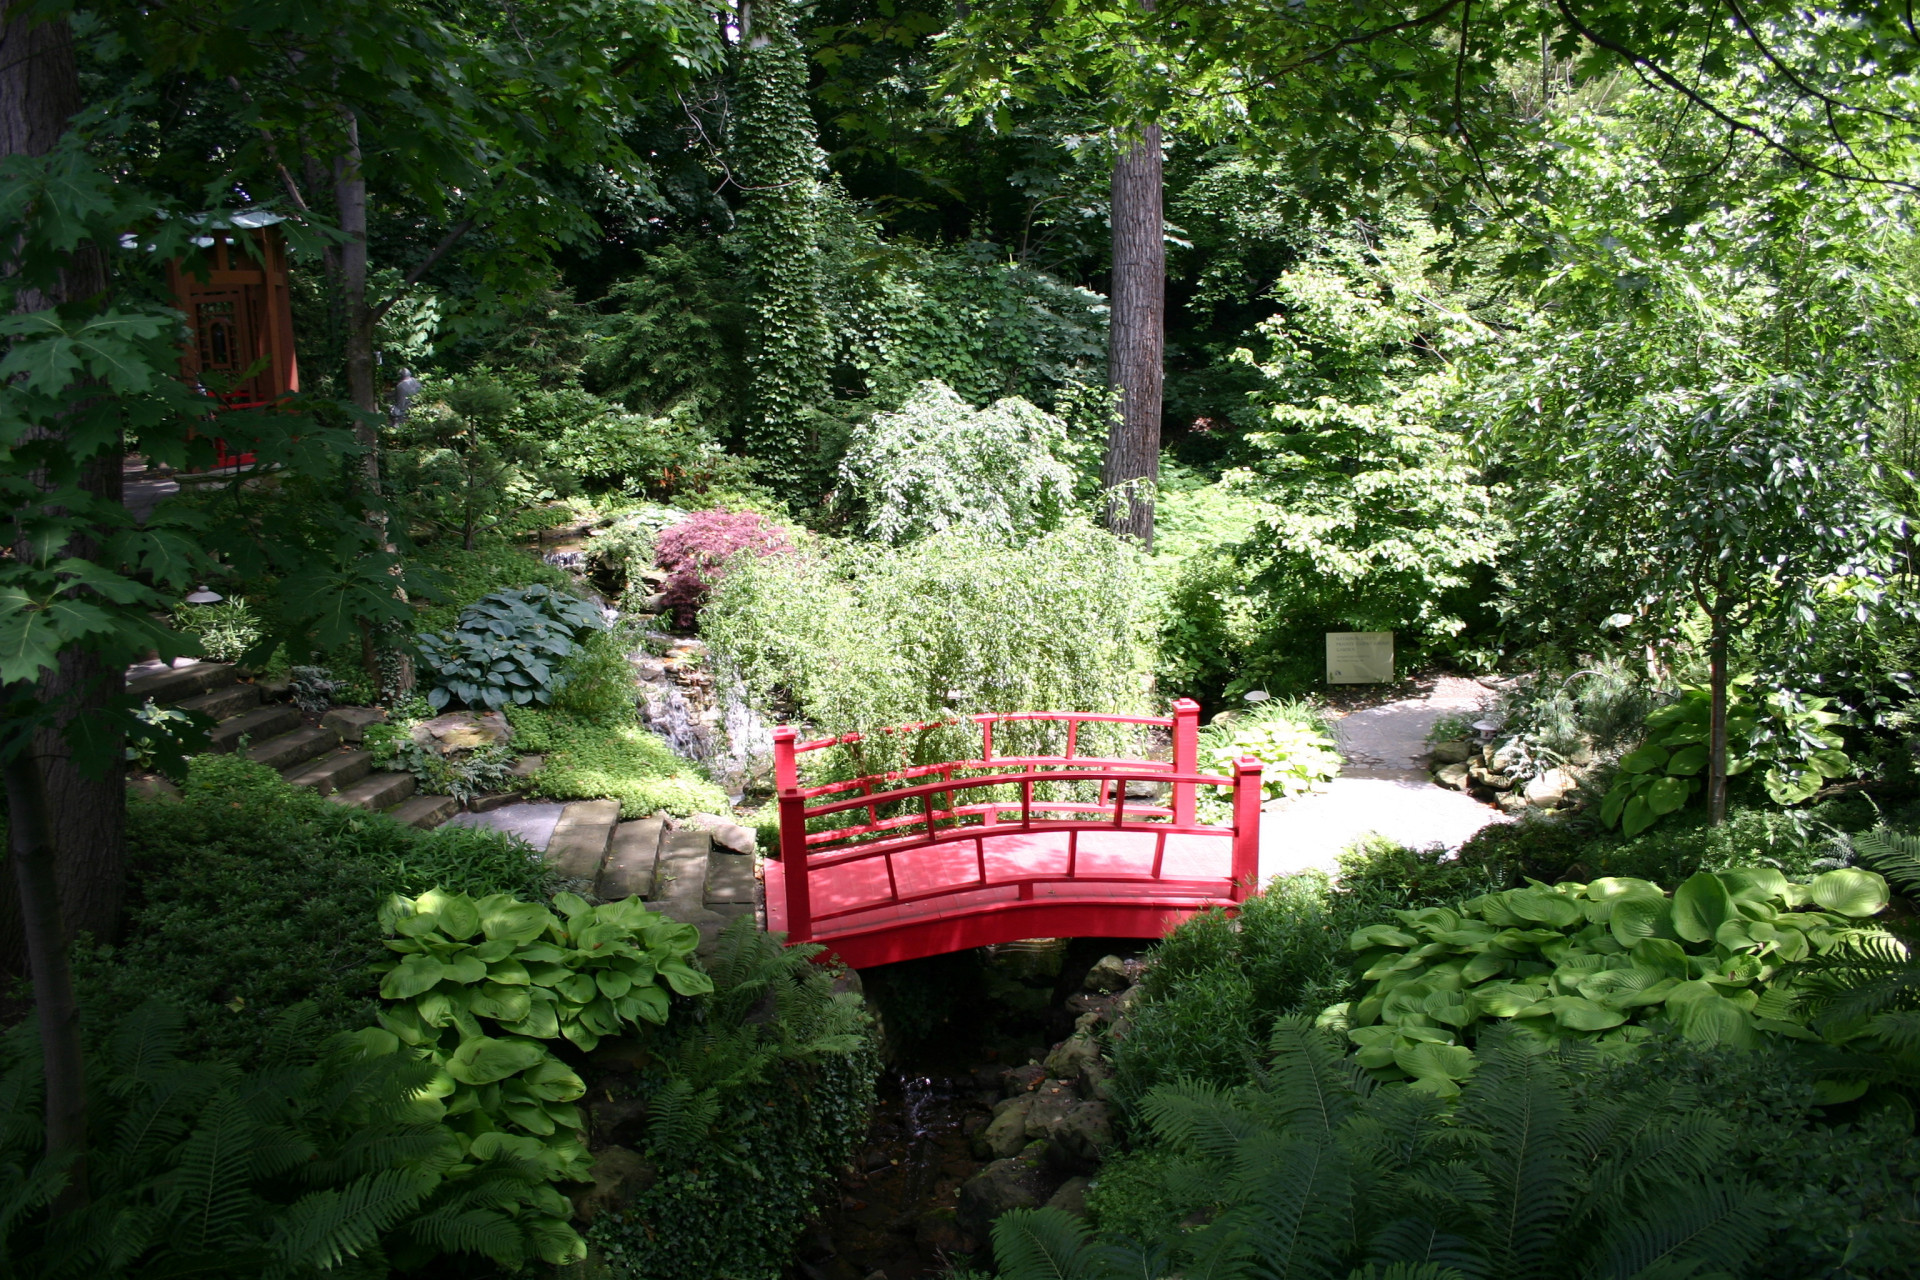 Though there is a variety of lovely gardens scattered throughout the US, the Cleveland Botanical Garden has a special 'Secret Garden' quality to it that is hard to top.<p><a href="https://www.msn.com/en-us/community/channel/vid-7xx8mnucu55yw63we9va2gwr7uihbxwc68fxqp25x6tg4ftibpra?cvid=94631541bc0f4f89bfd59158d696ad7e">Follow us and access great exclusive content every day</a></p>